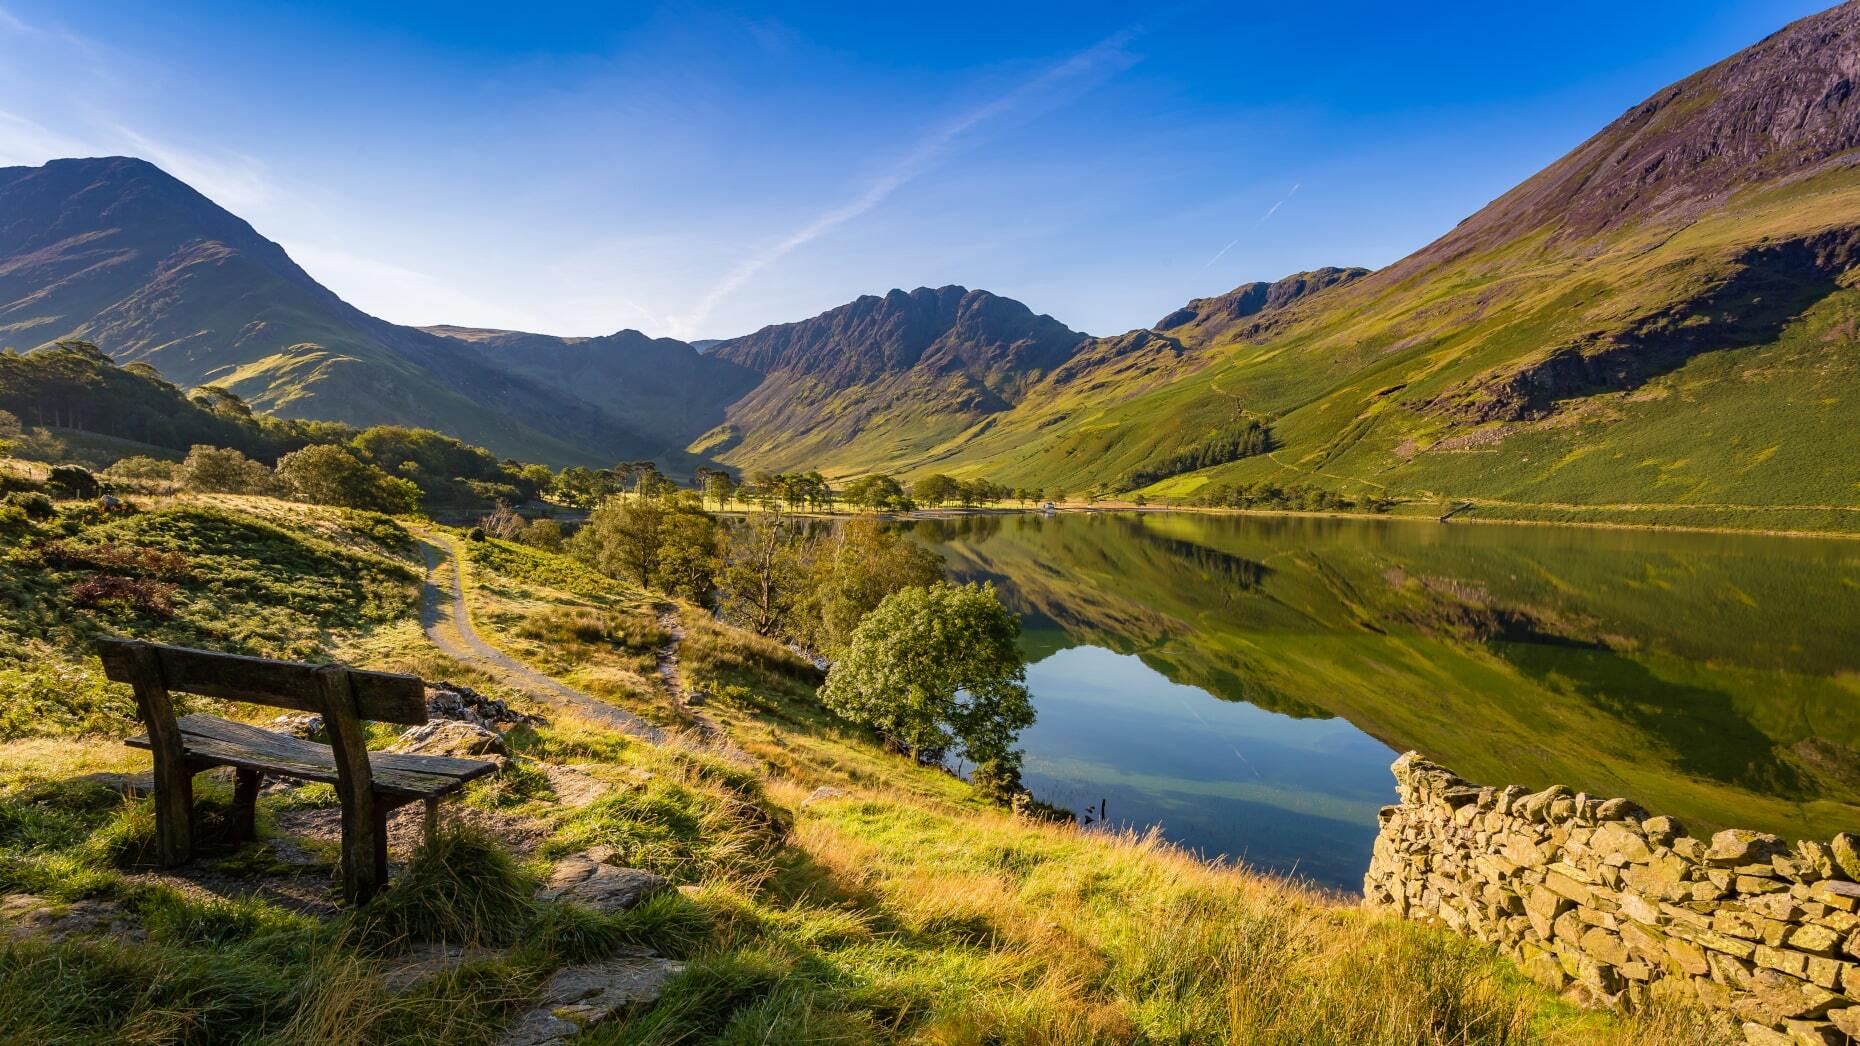 <p>Well known for harbouring some of the greenest scenery in England, <a href="https://www.lakedistrict.gov.uk/" class="atom_link atom_valid" rel="noreferrer noopener">Lake District National Park</a> is located in the northeast of the country and covers an area of 2,362 square kilometres (912 square miles). With its lush hills and sparkling lakes, this region is guaranteed to make any nature lover’s heart dance. Bibliophiles will also be happy to learn that English author Beatrix Potter helped lead efforts to preserve this magical area.</p>